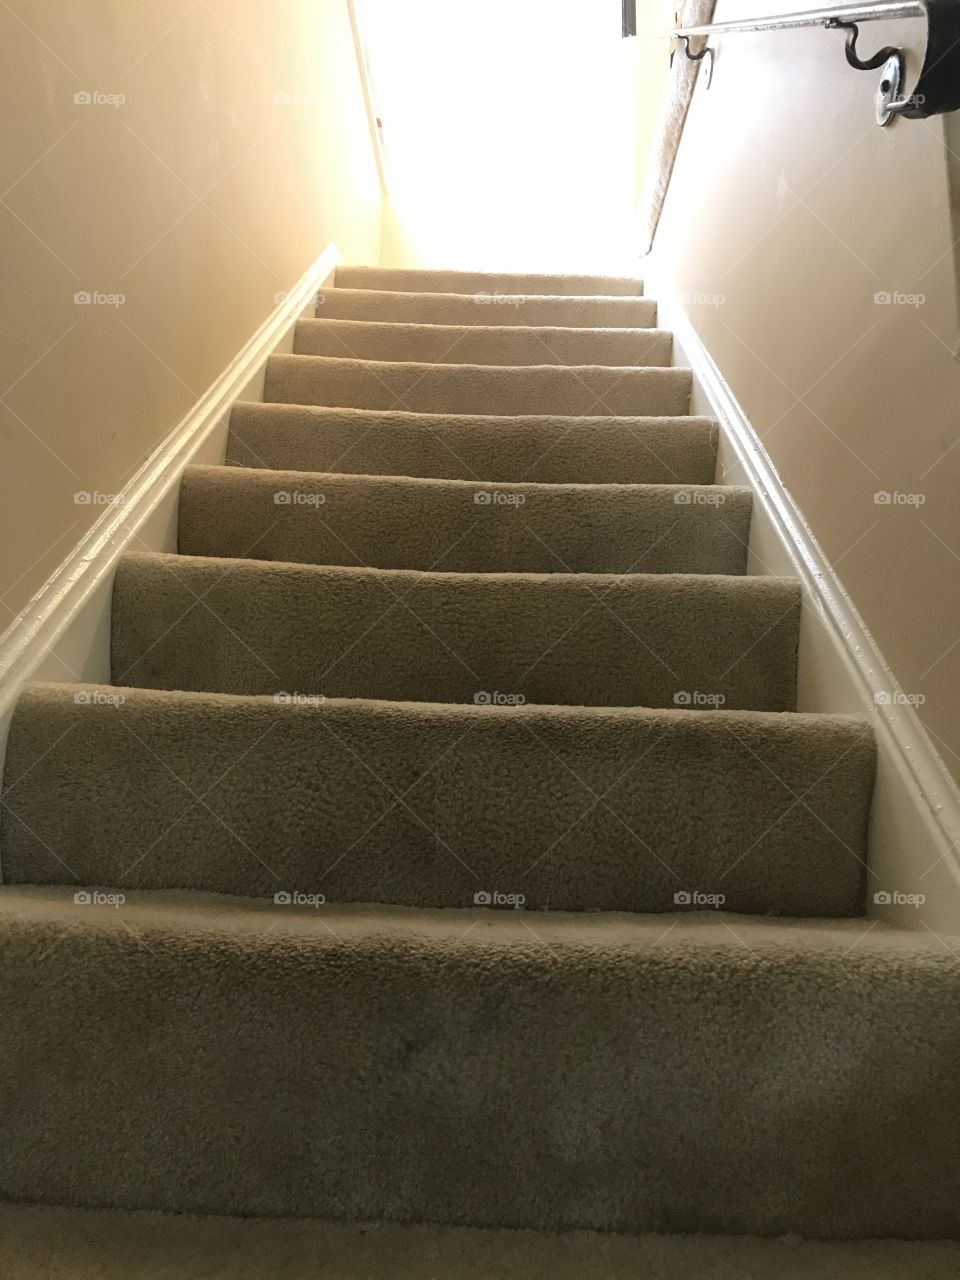 #stairs